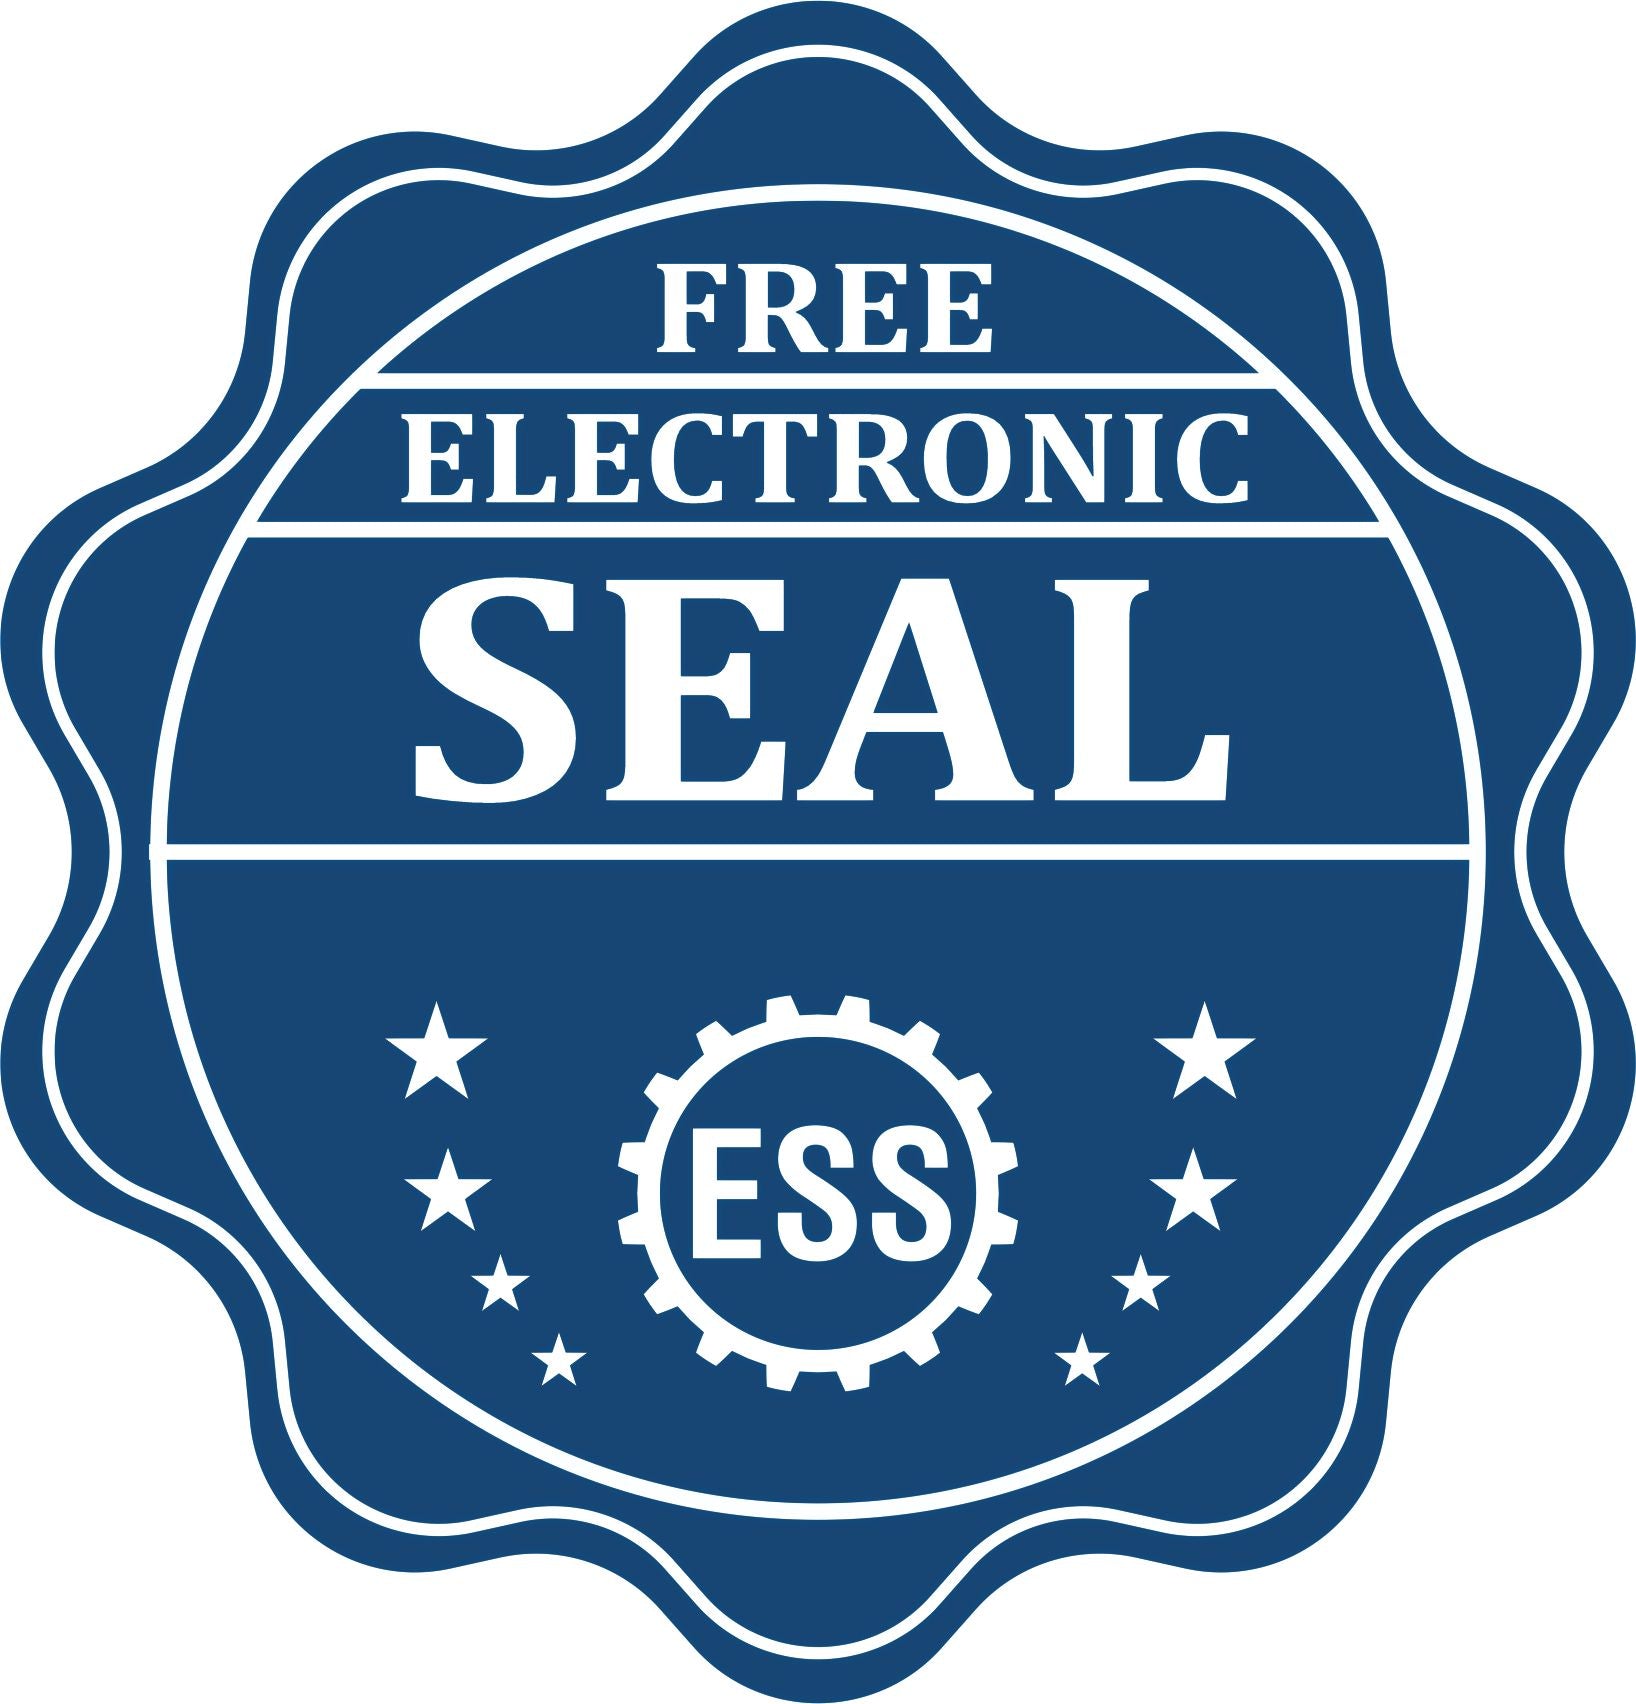 A badge showing a free electronic seal for the Heavy Duty Cast Iron Virginia Engineer Seal Embosser with stars and the ESS gear on the emblem.